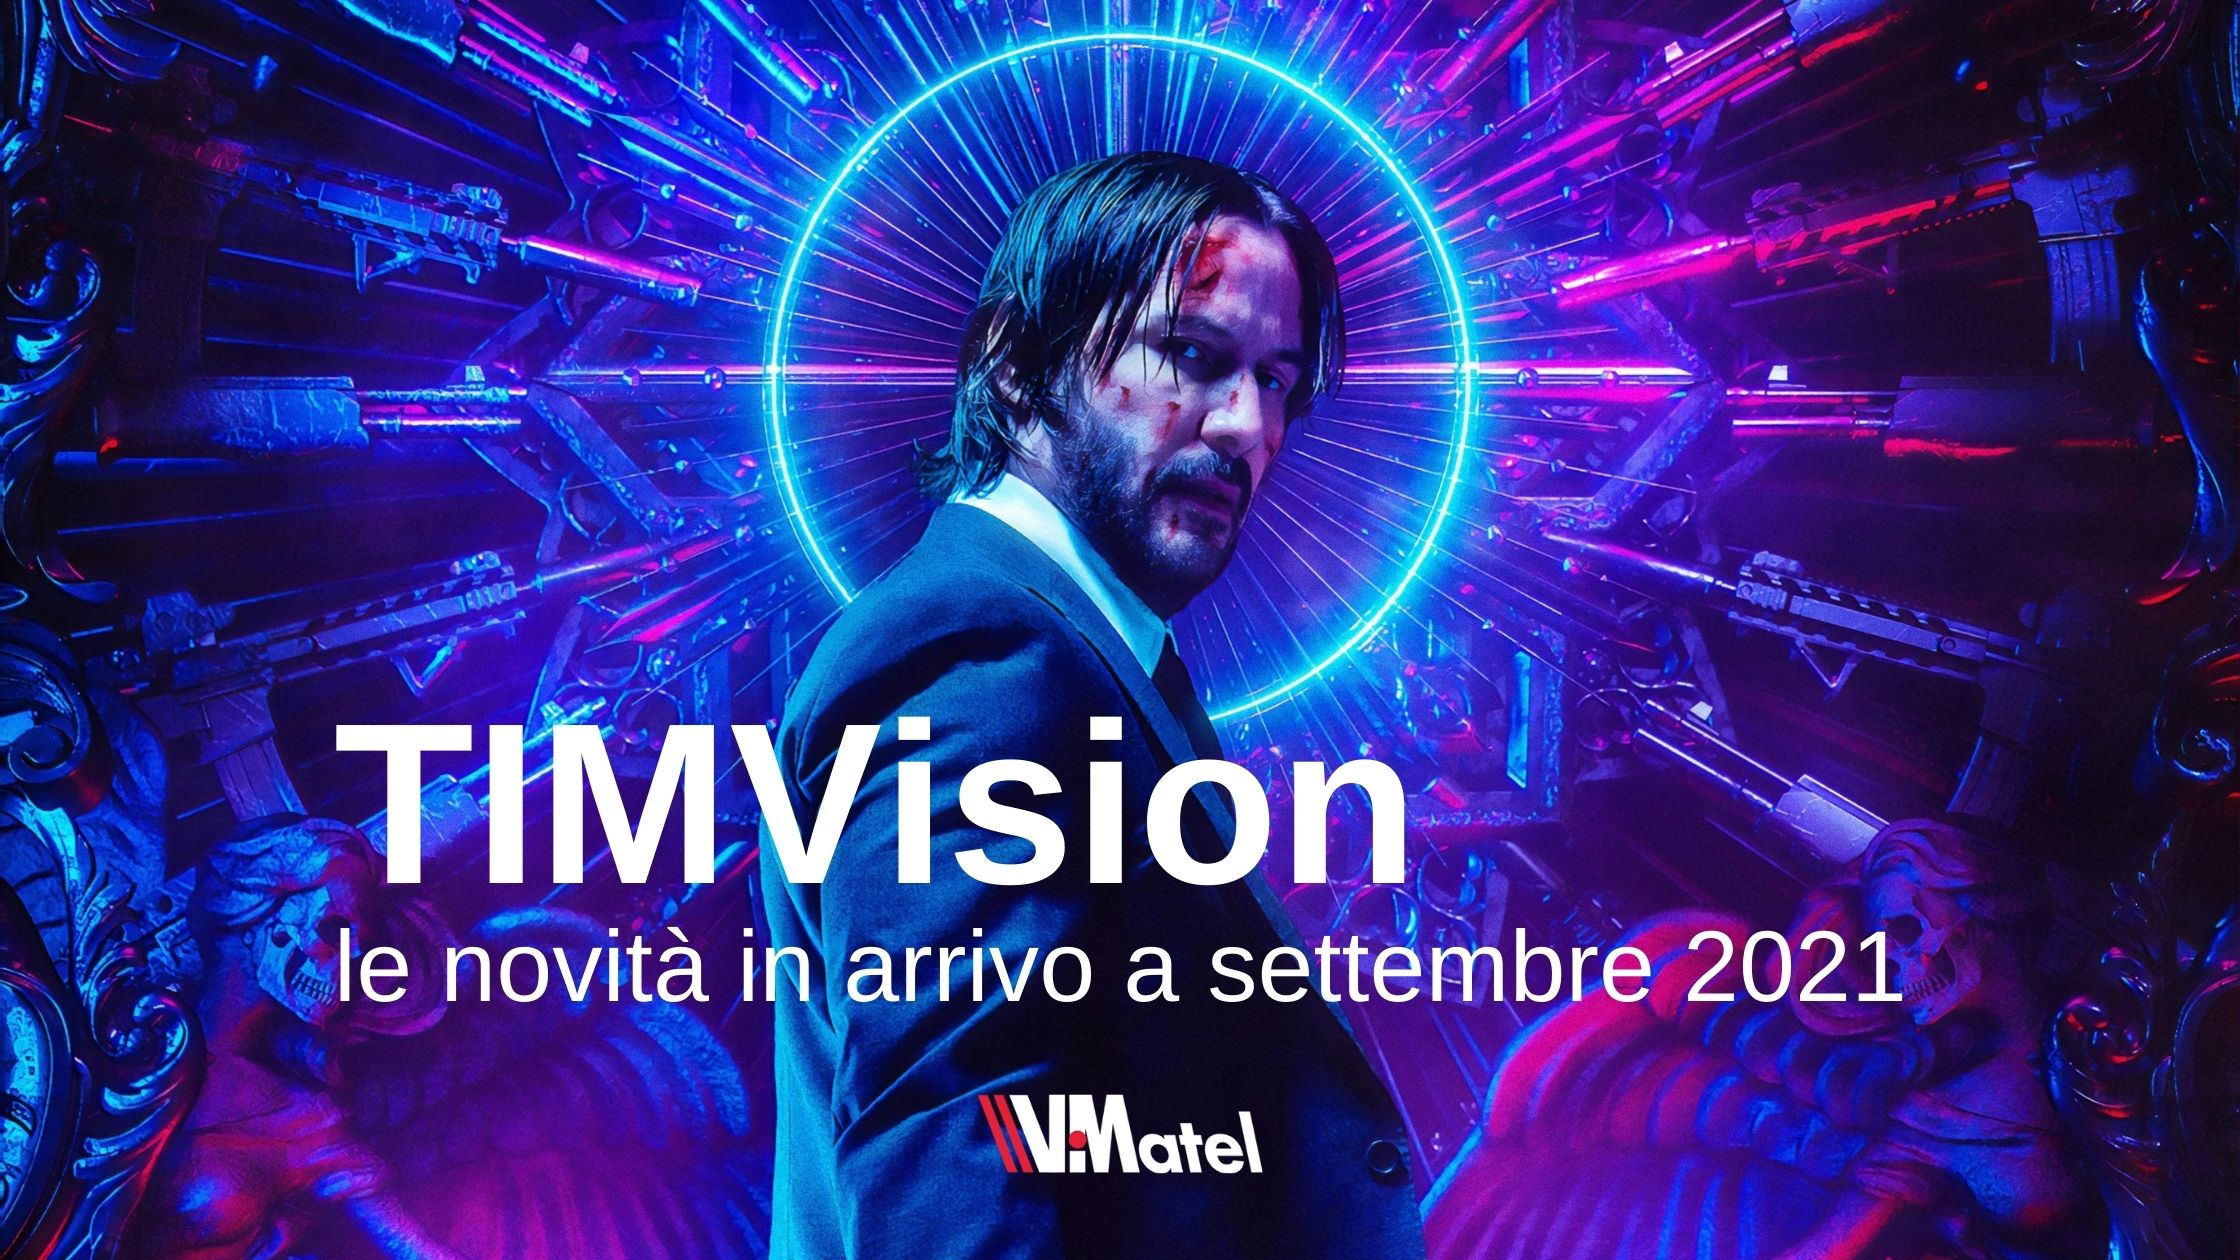 TIMVision: the news coming in September 2021